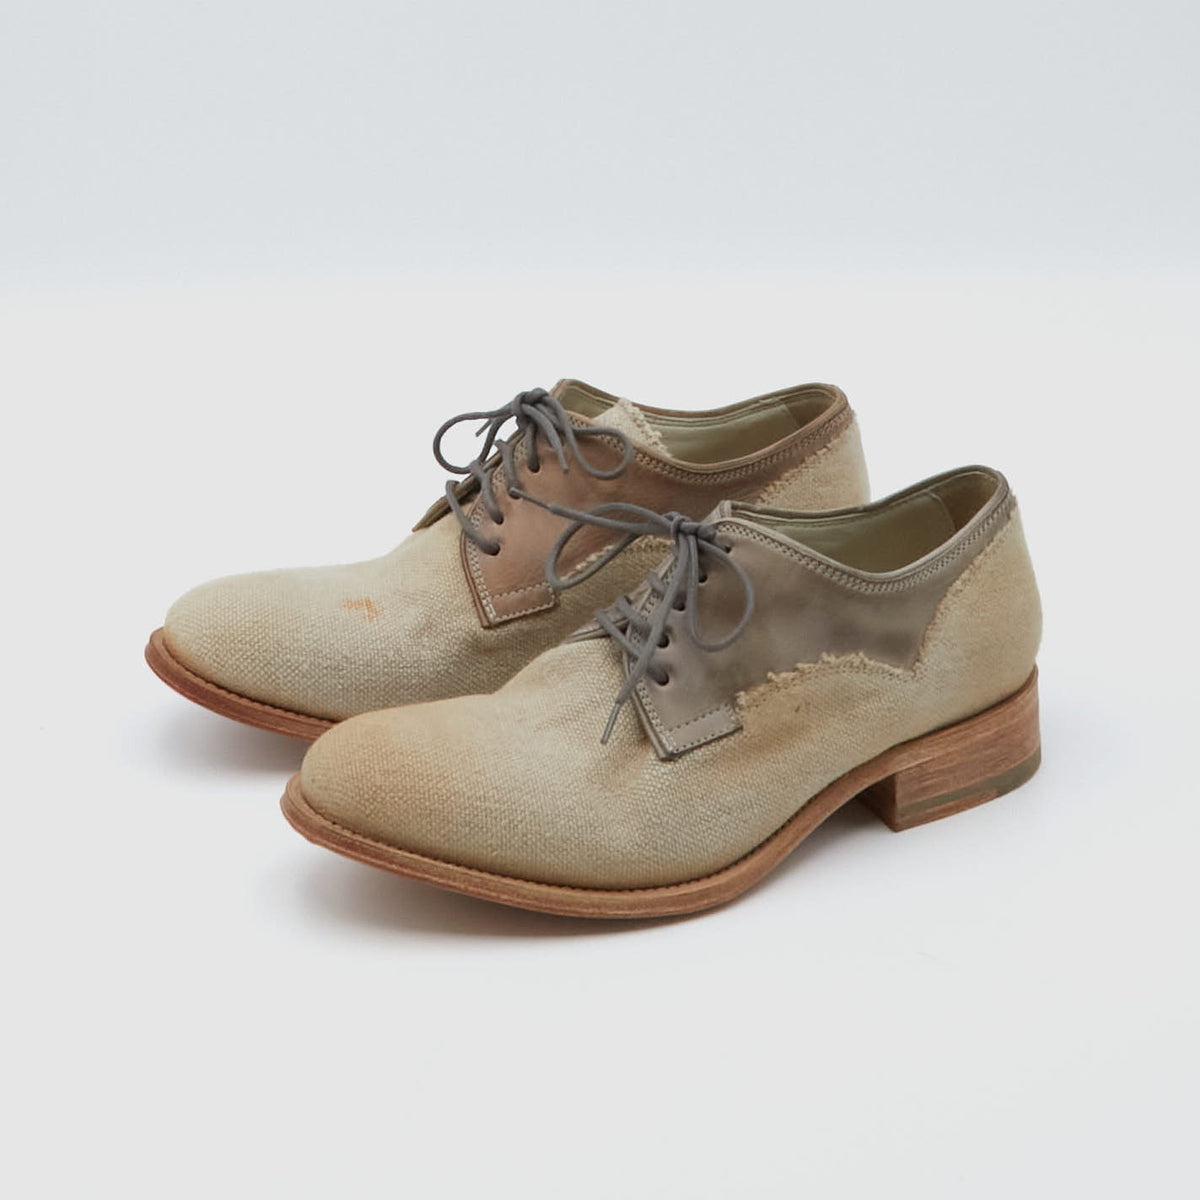 n.d.c. made by hand Ladies Leather Lined Linen Shoe